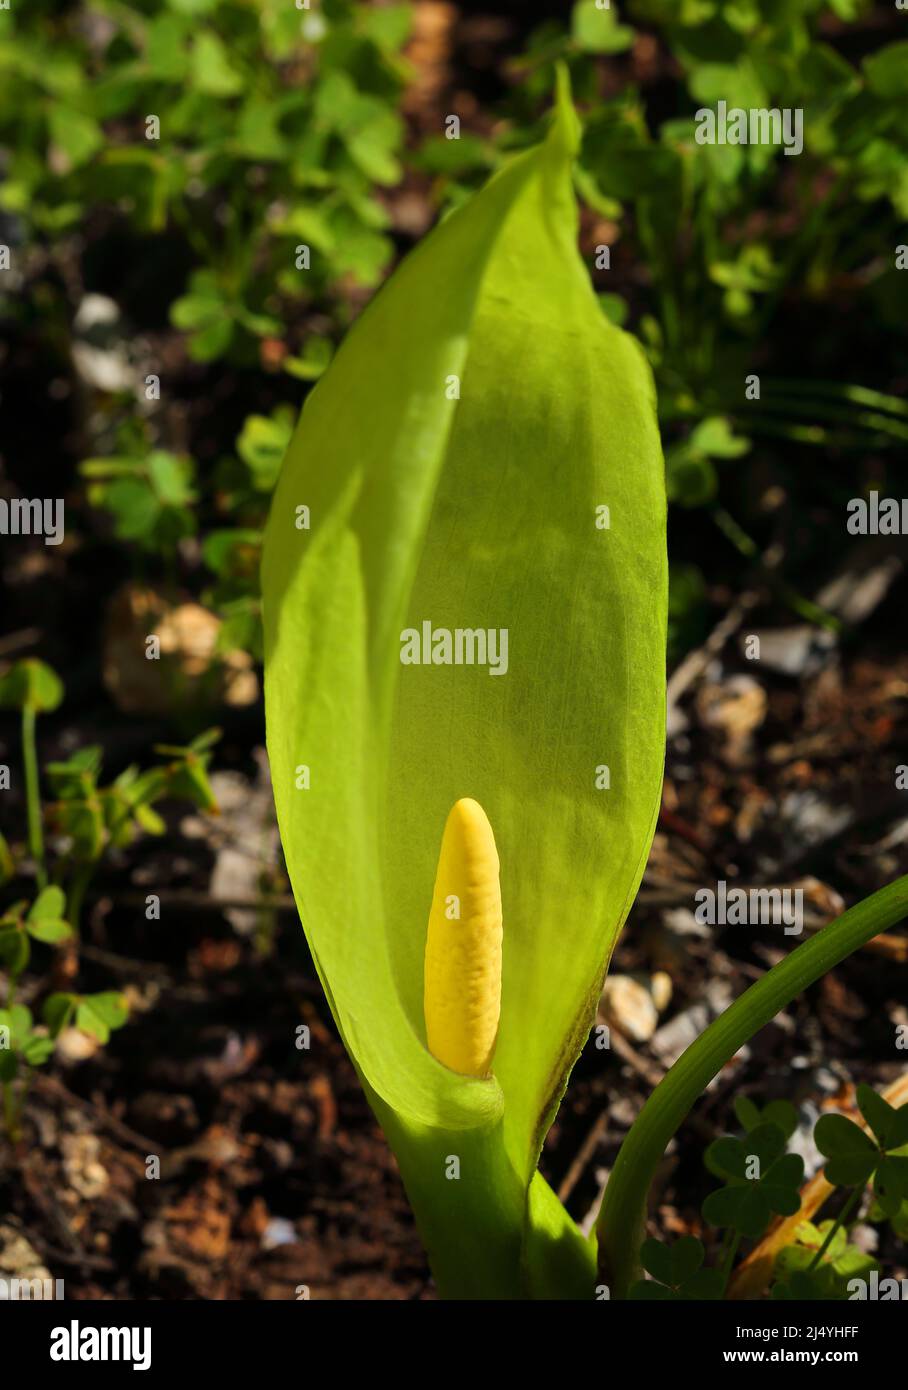 Arum italicum flowering. A perennial plant in the family Araceae, also known as Italian arum and Italian lords and ladies. Springtime - Portugal. Stock Photo